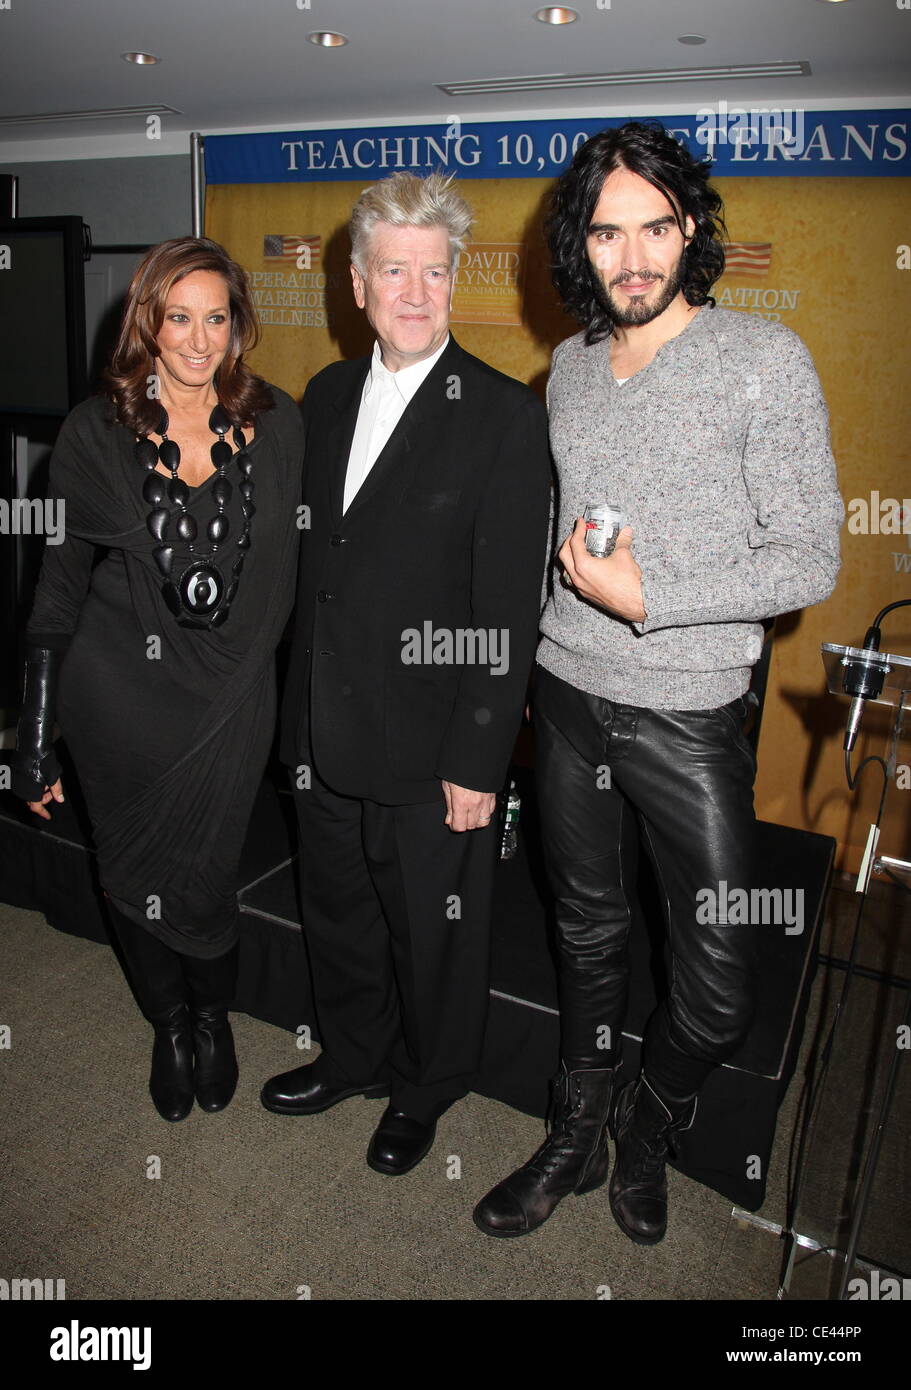 Donna Karan, David Lynch and Russell Brand Press conference for the launch of the 'David Lynch Foundation's Operation Warrior Wellness' held at Paley Center New York City, USA - 13.12.10 Stock Photo